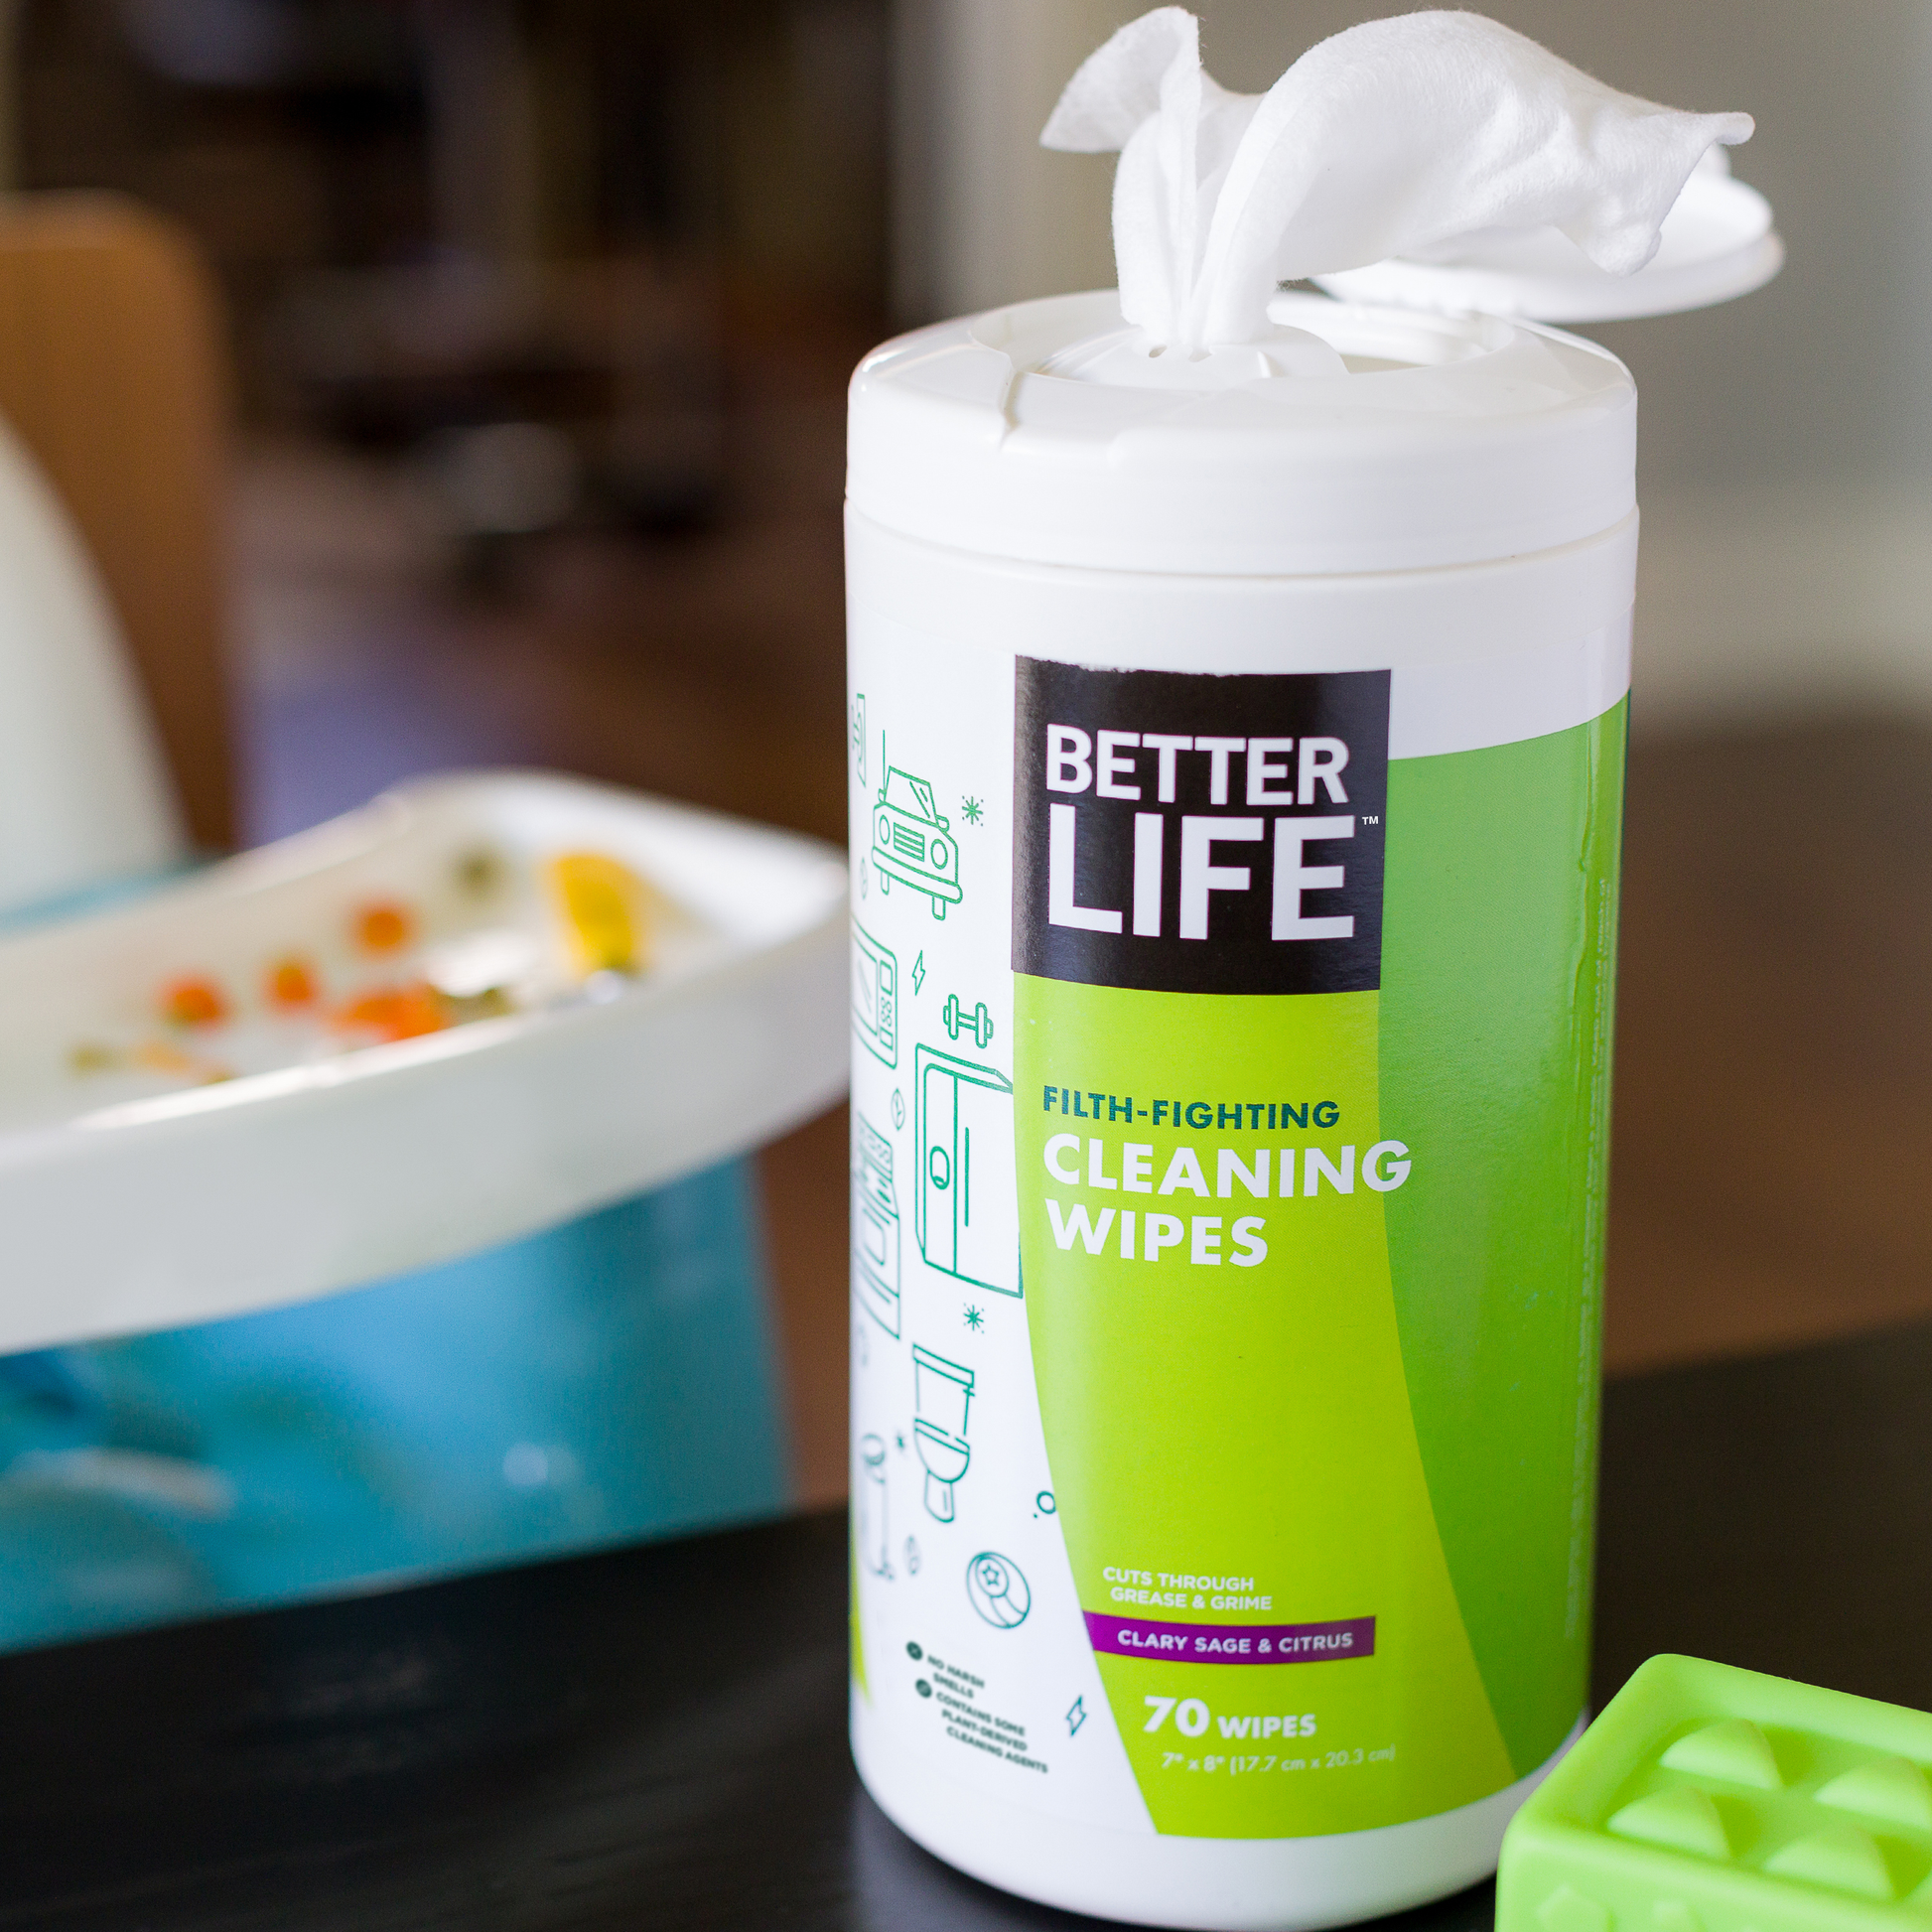 Better Life cleaning wipes on a counter.